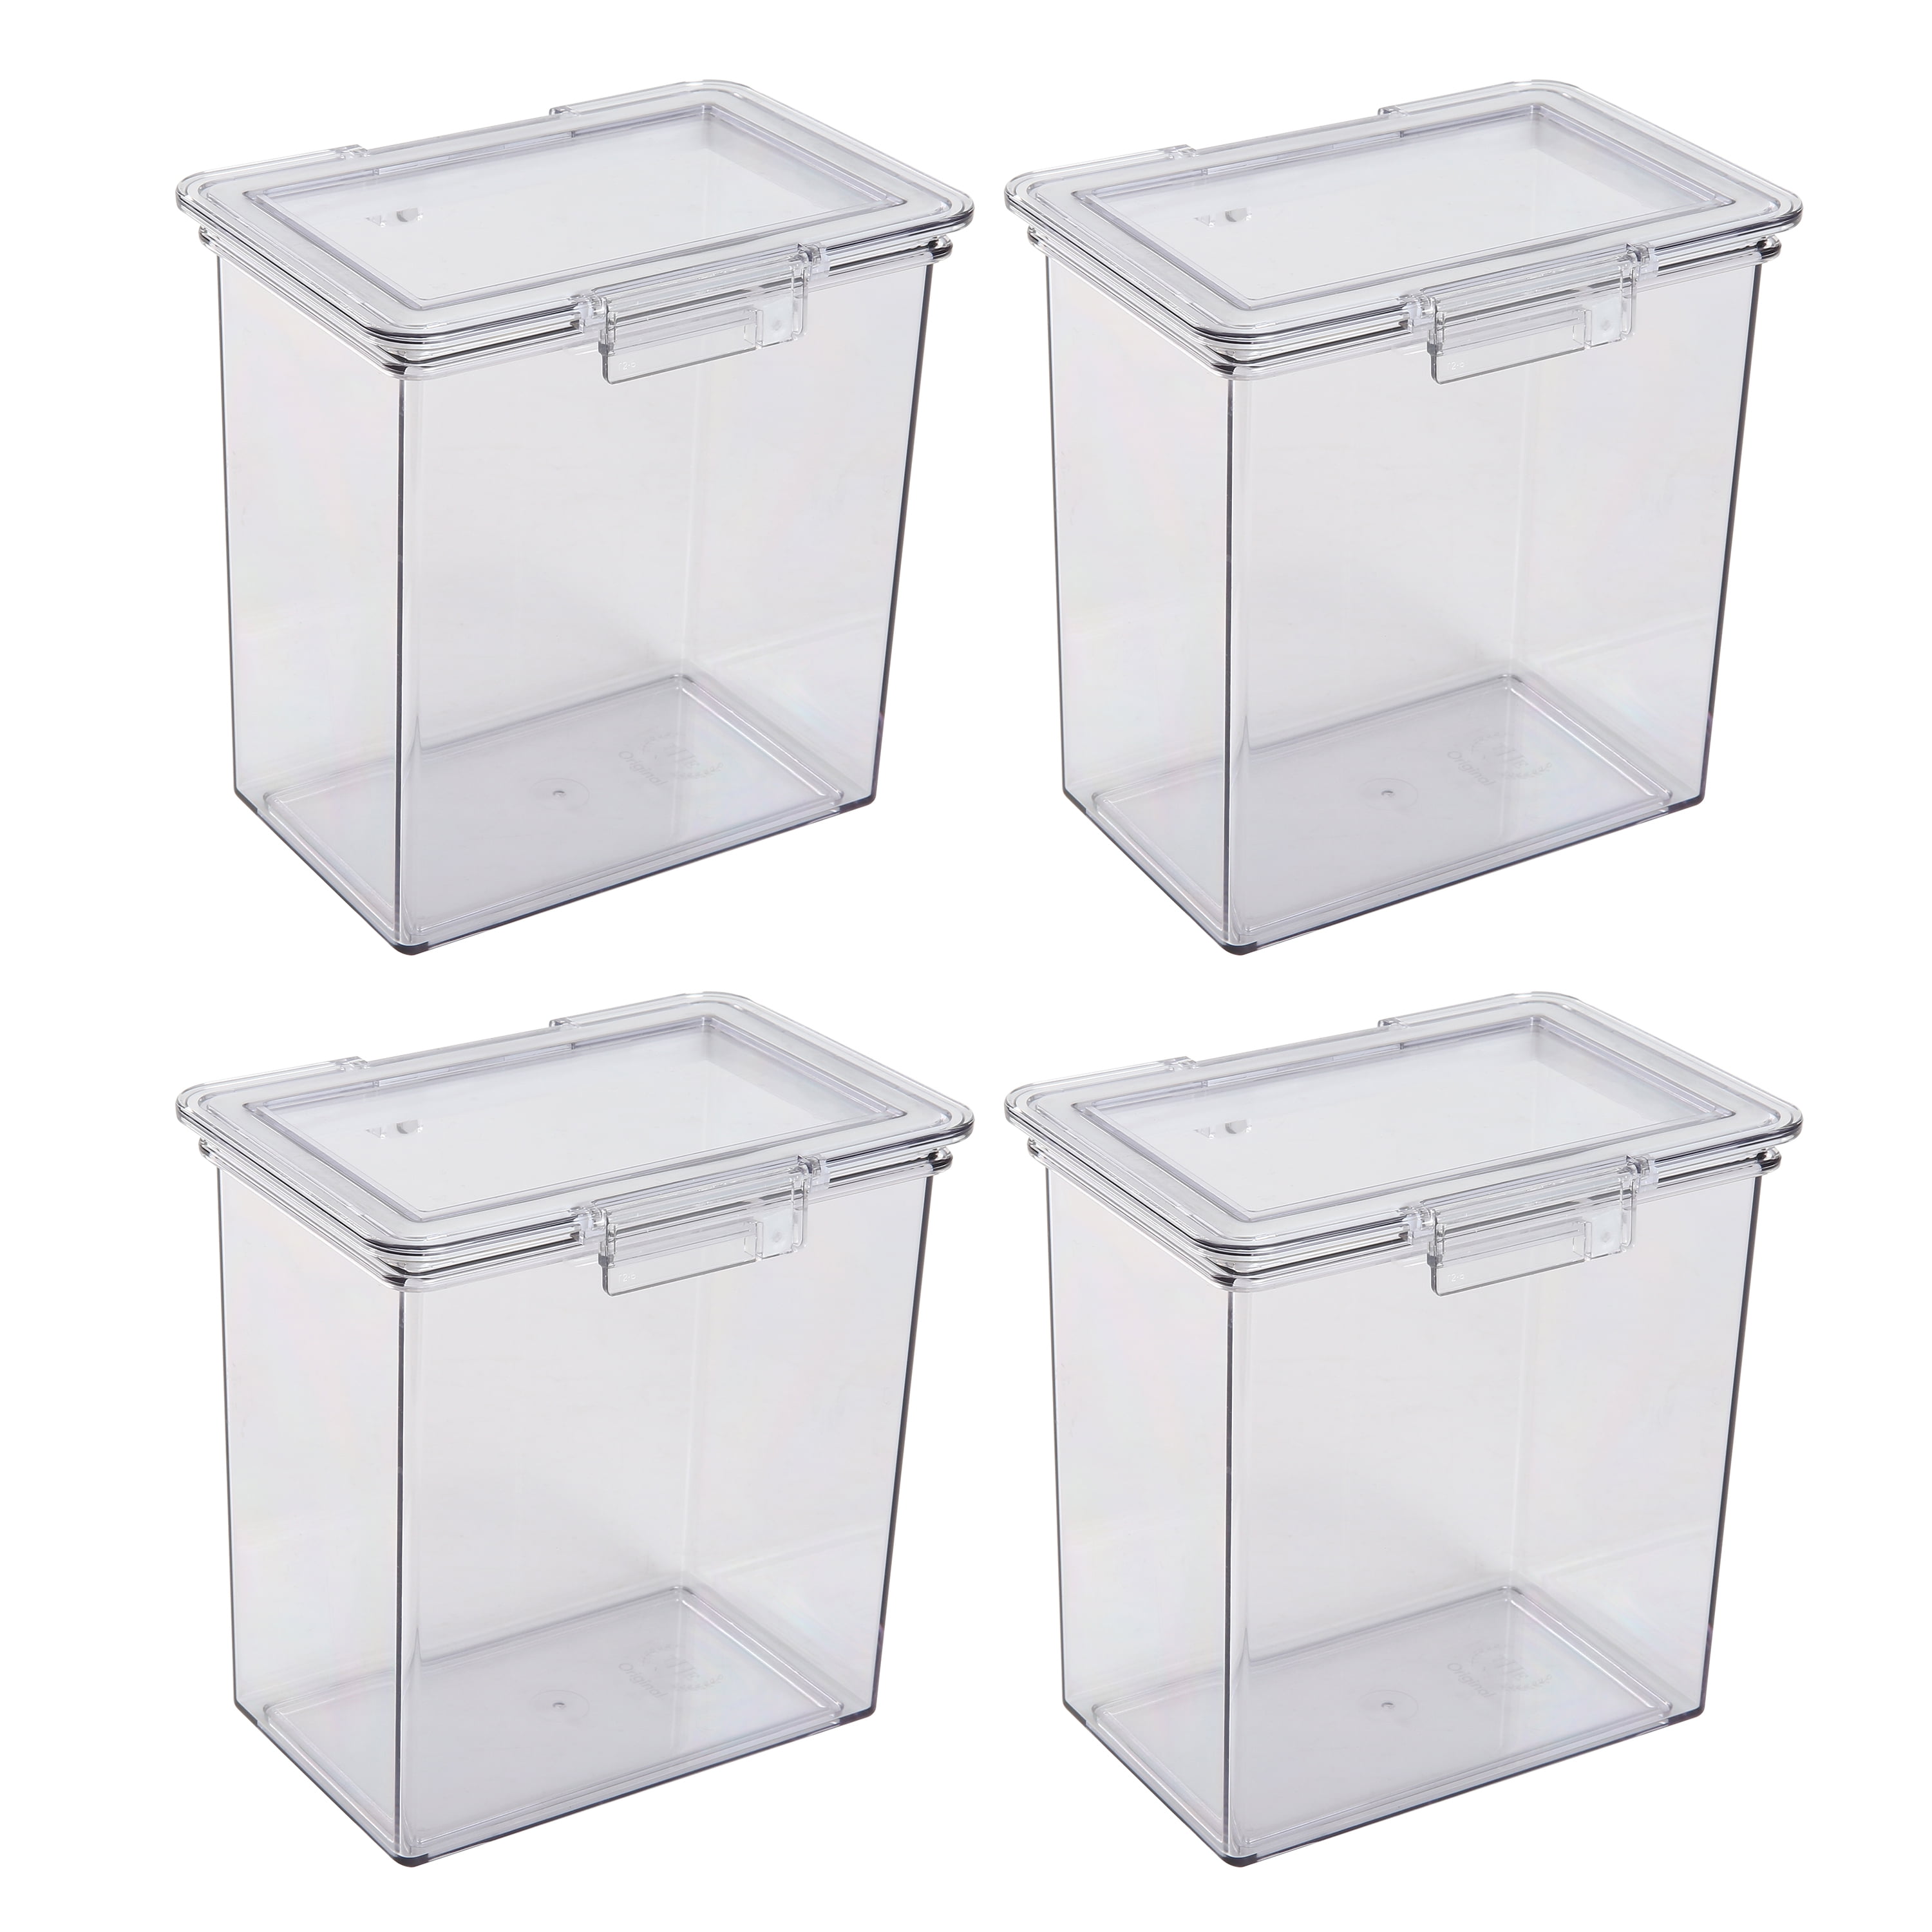 The Home Edit Small Canister Food Storage Containers, Pack of 6, Clear